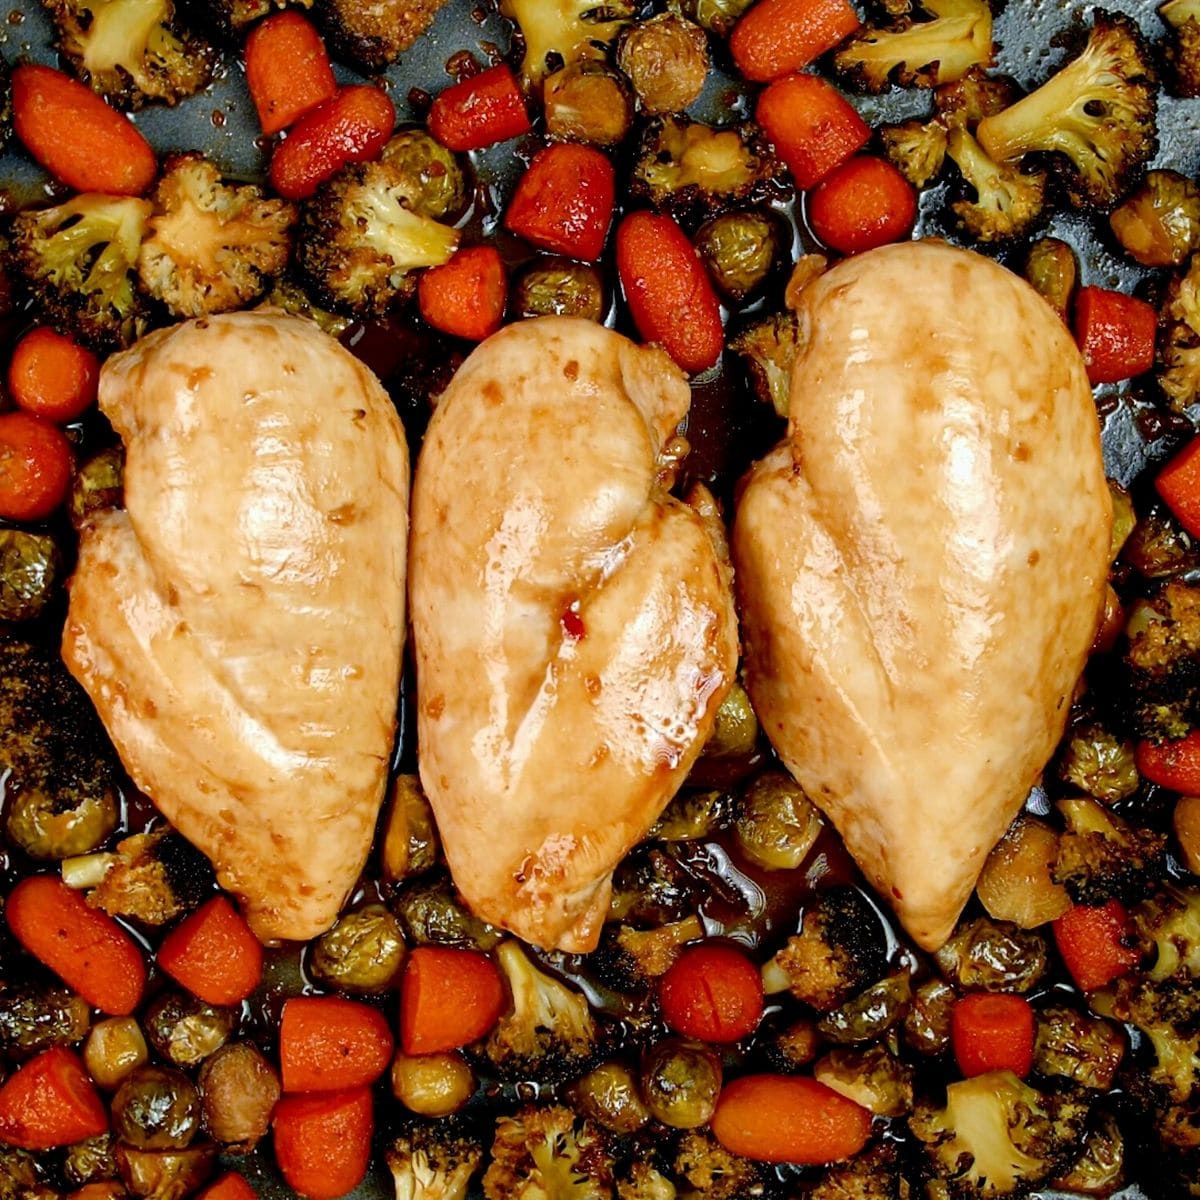 Three baked chicken breasts on baking sheet with brussels sprouts and carrots